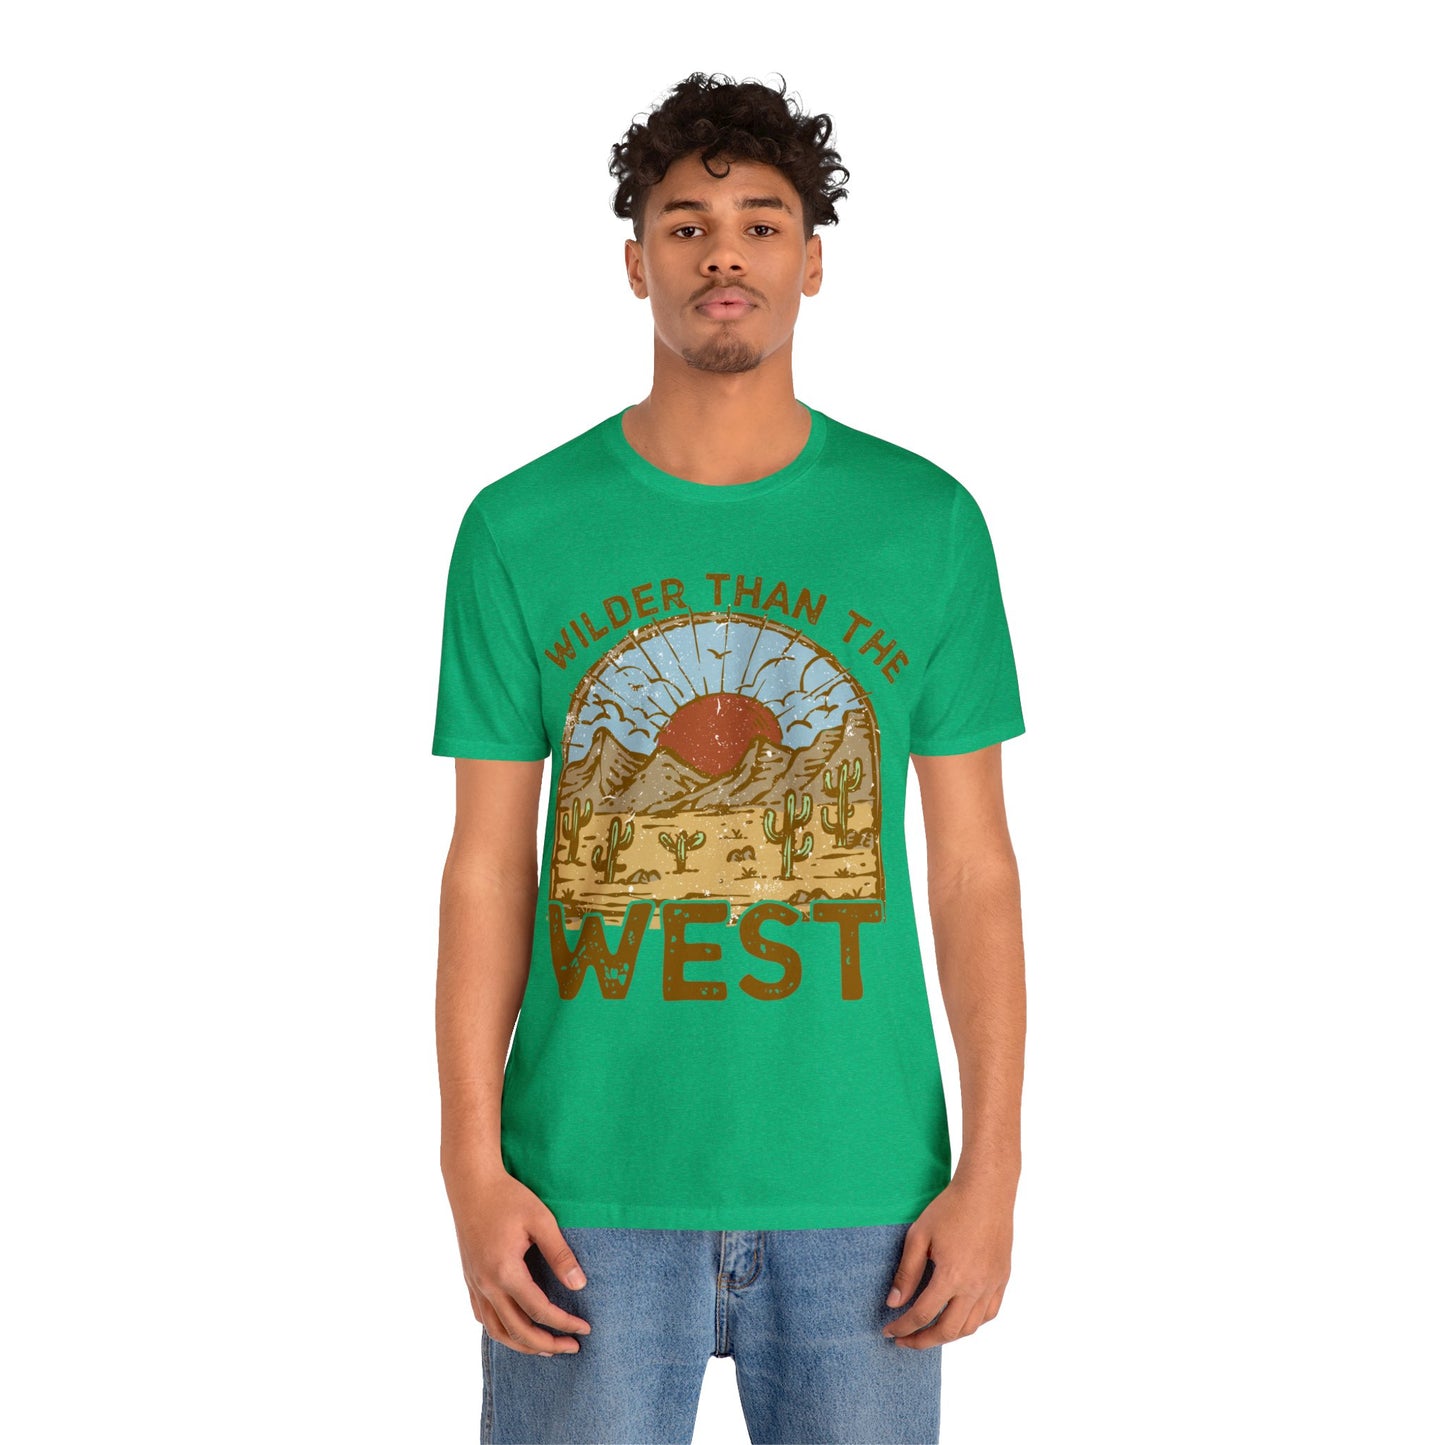 Wilder Than the West Graphic Tee